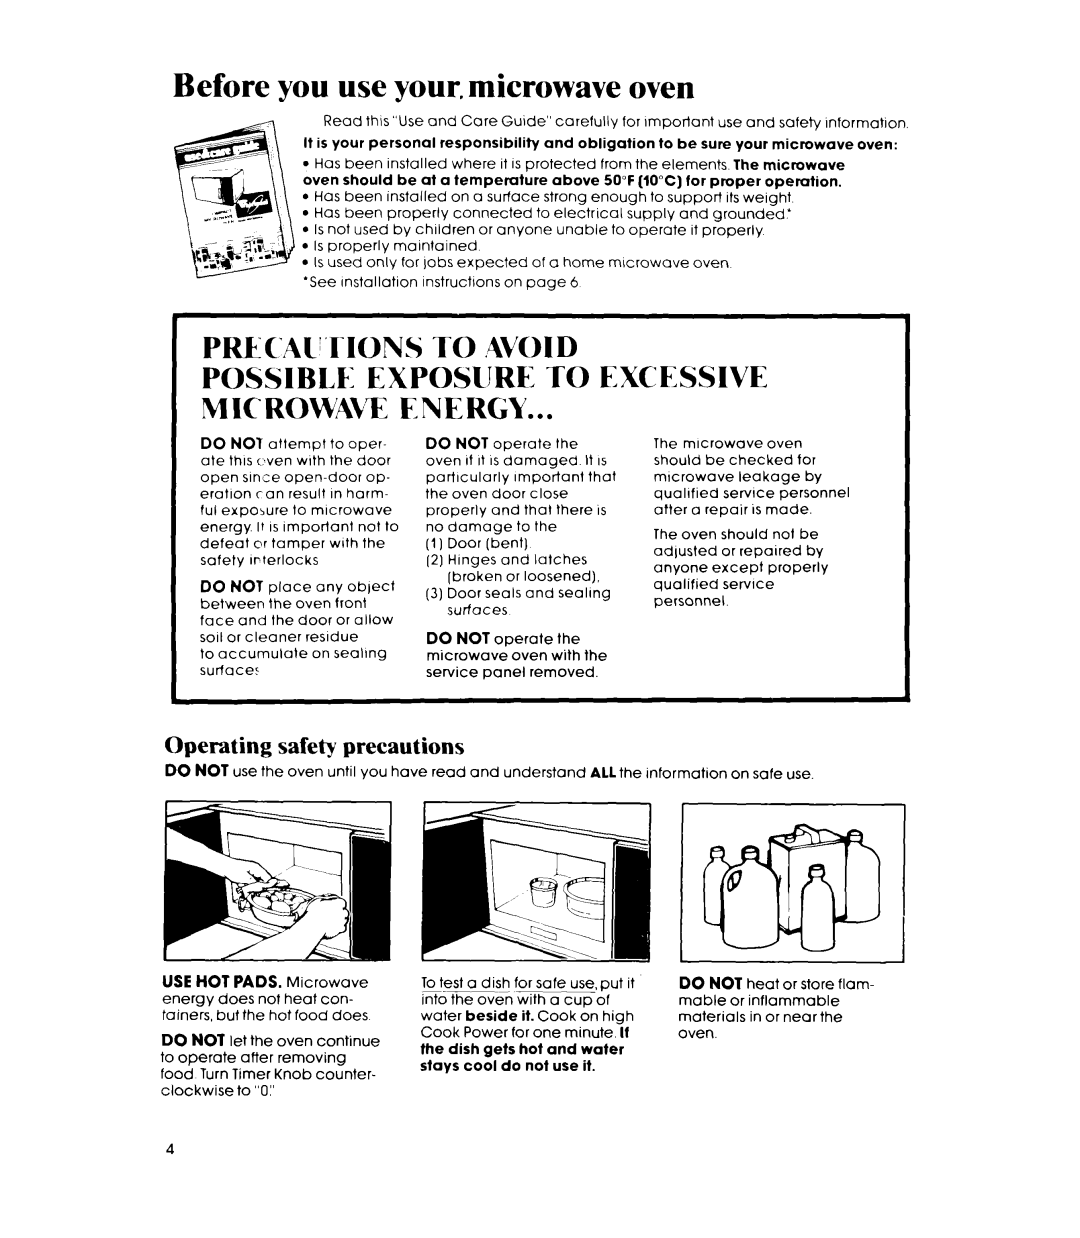 Whirlpool MW3200XM manual Before you use your, microwave oven, PRECAlTIONS TO .4VOID, Operating safety precautions 